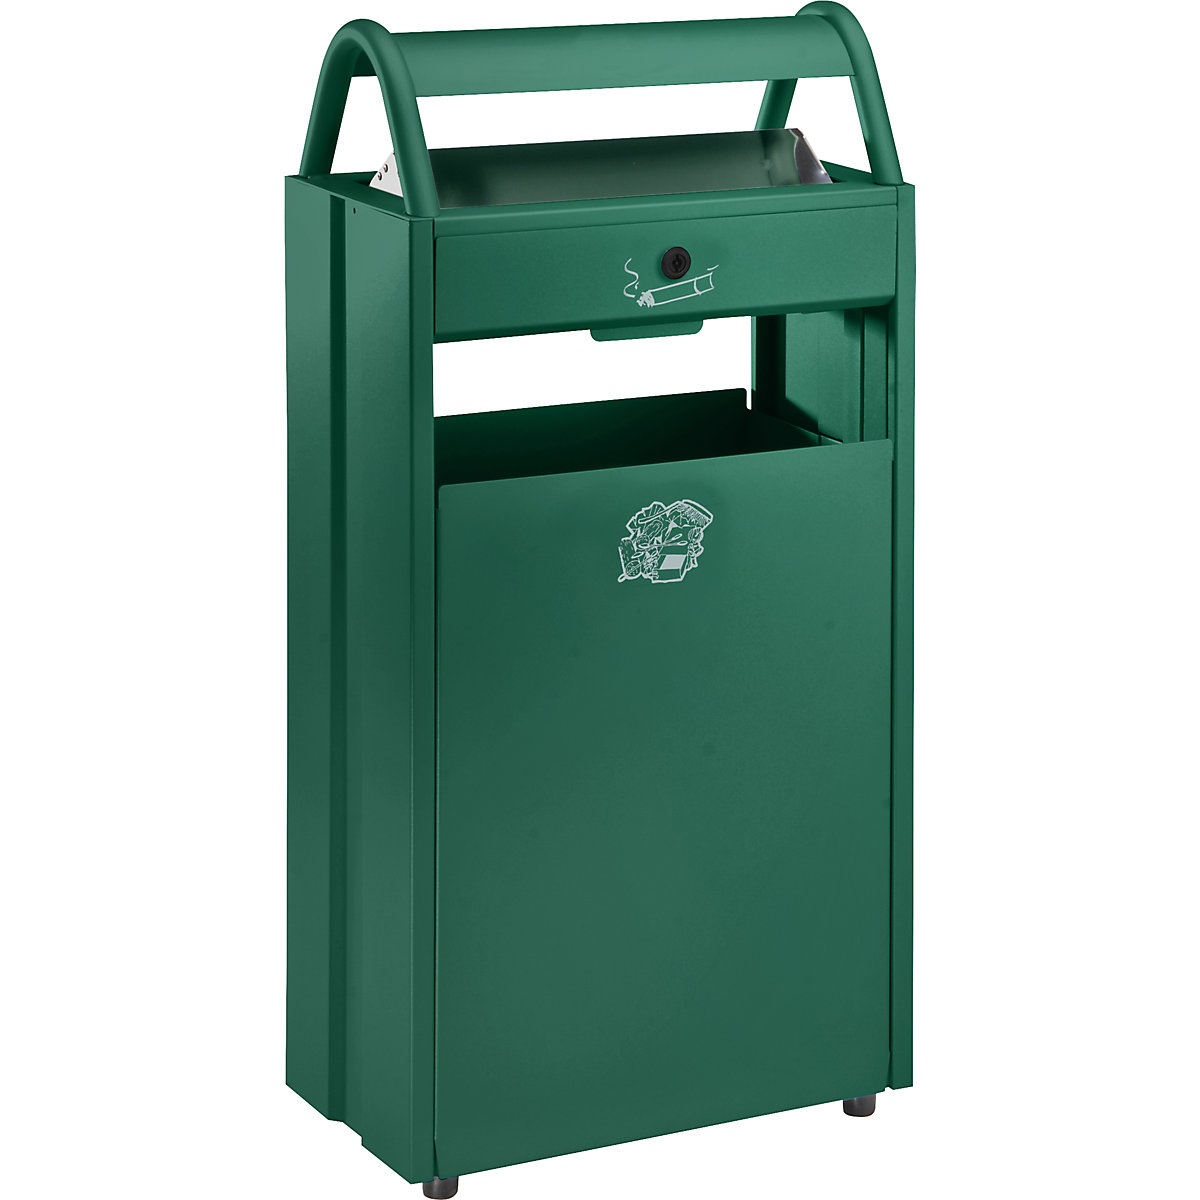 VAR – Waste collector with ashtray and rain protection hood, capacity 60 l, WxHxD 480 x 960 x 250 mm, moss green RAL 6005